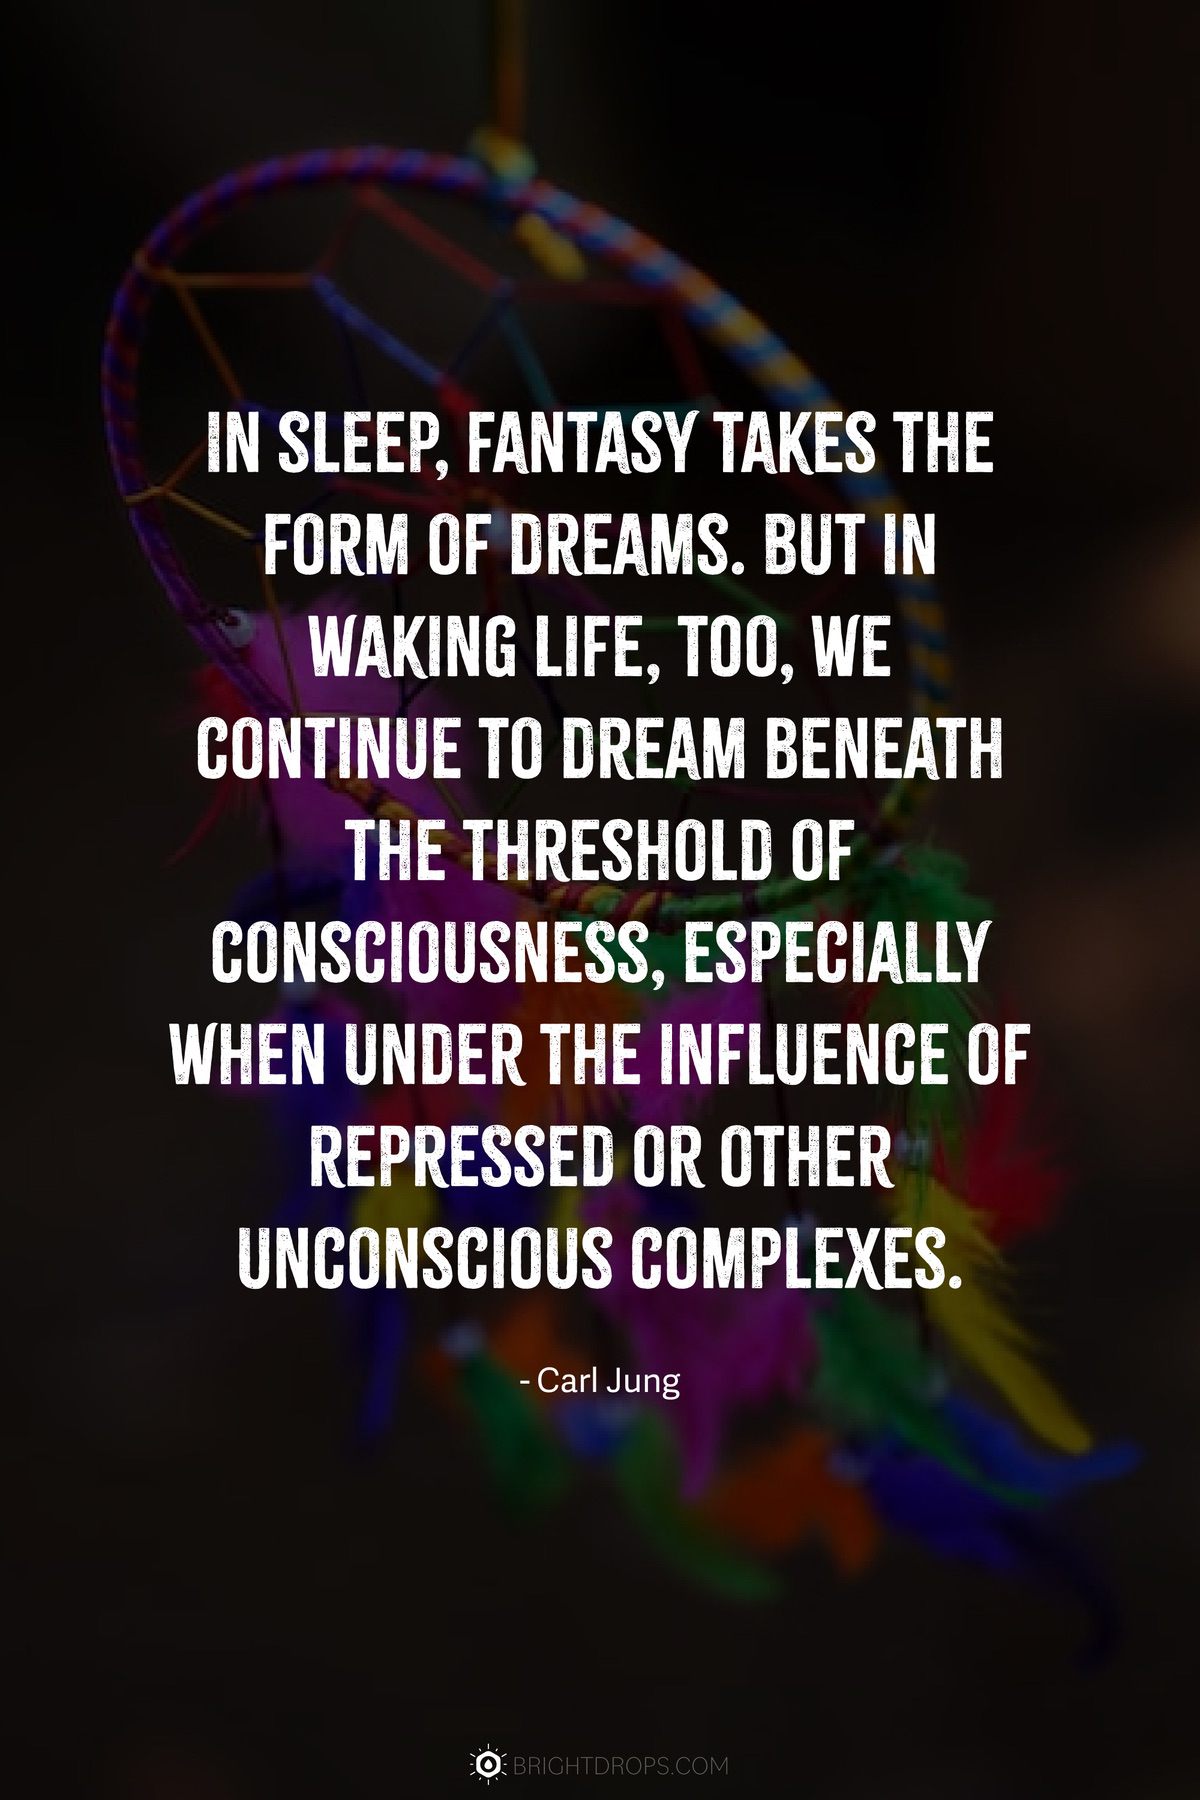 In sleep, fantasy takes the form of dreams. But in waking life, too, we continue to dream beneath the threshold of consciousness, especially when under the influence of repressed or other unconscious complexes.